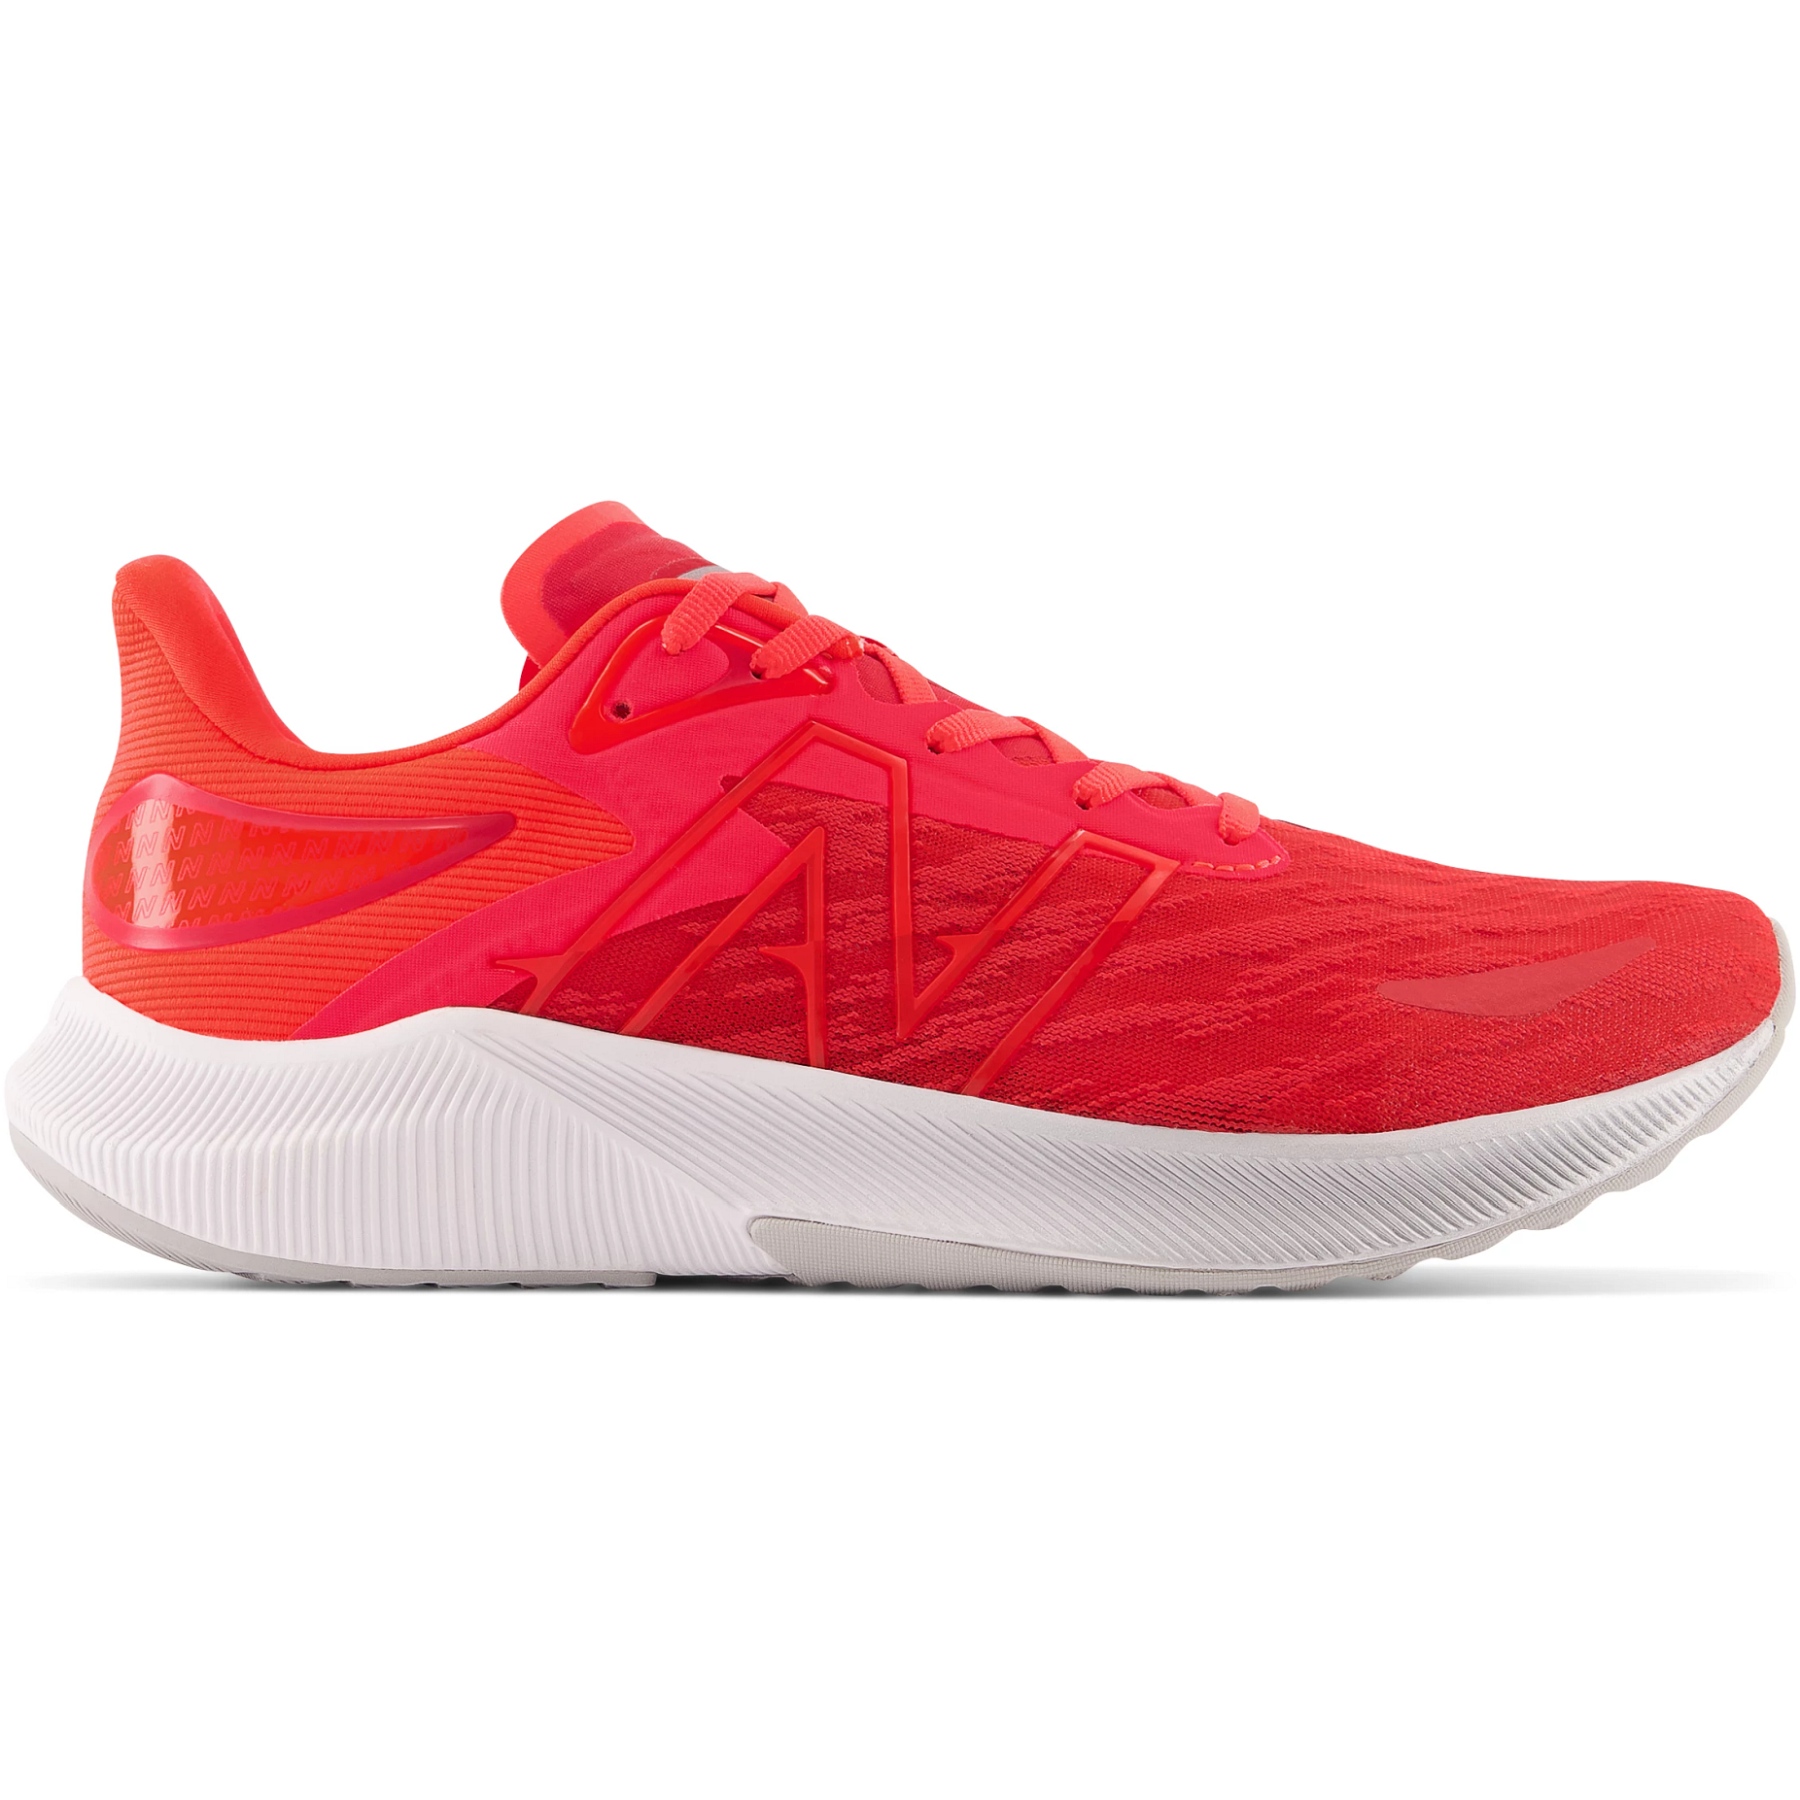 Productfoto van New Balance FuelCell Propel v3 Running Shoes - Red